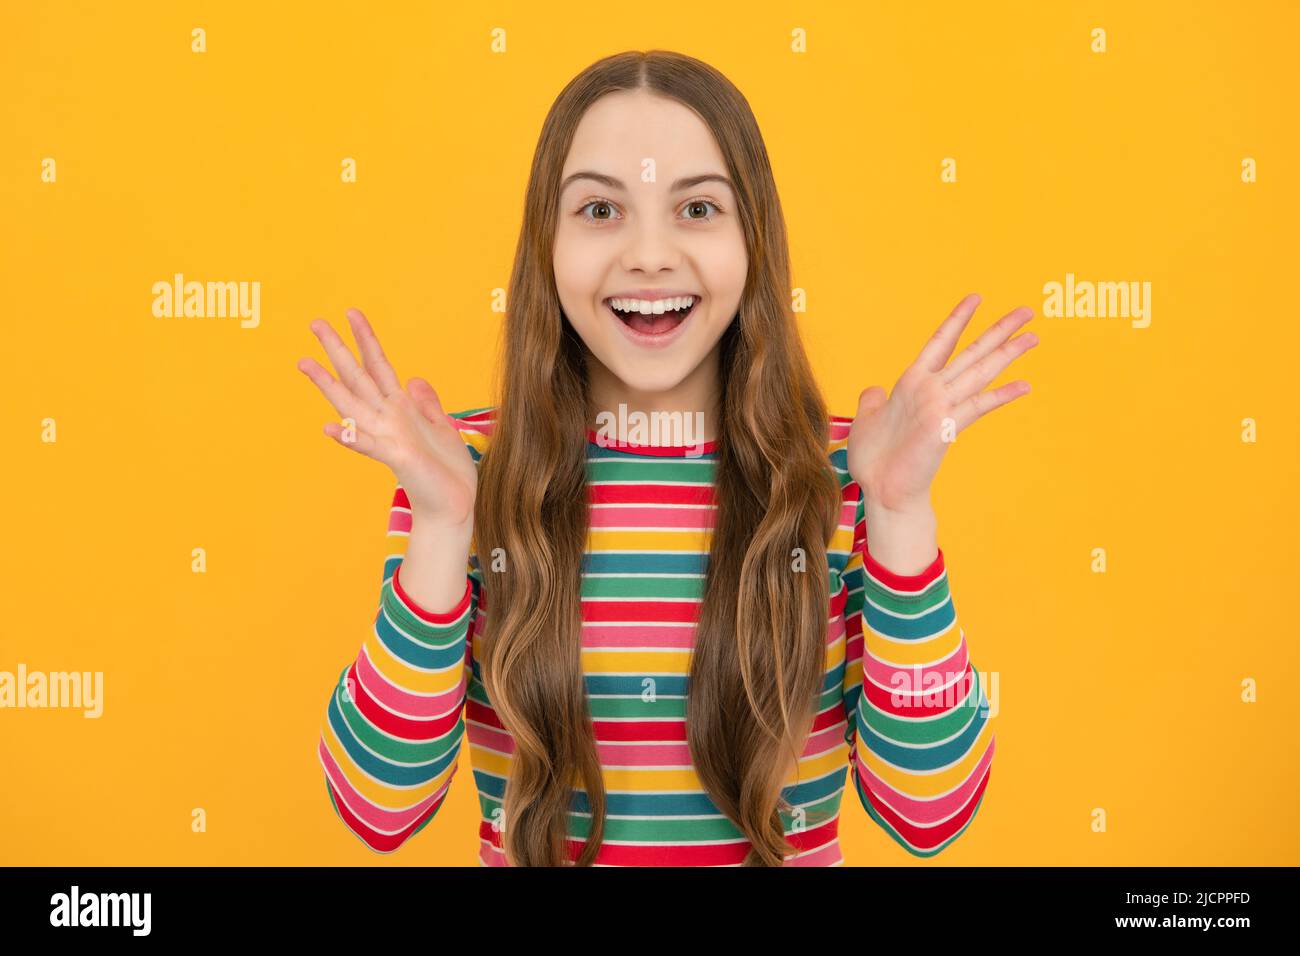 https://c8.alamy.com/comp/2JCPPFD/excited-kids-face-amazed-expression-cheerful-and-glad-amazed-child-with-open-mouth-on-yellow-background-surprise-2JCPPFD.jpg